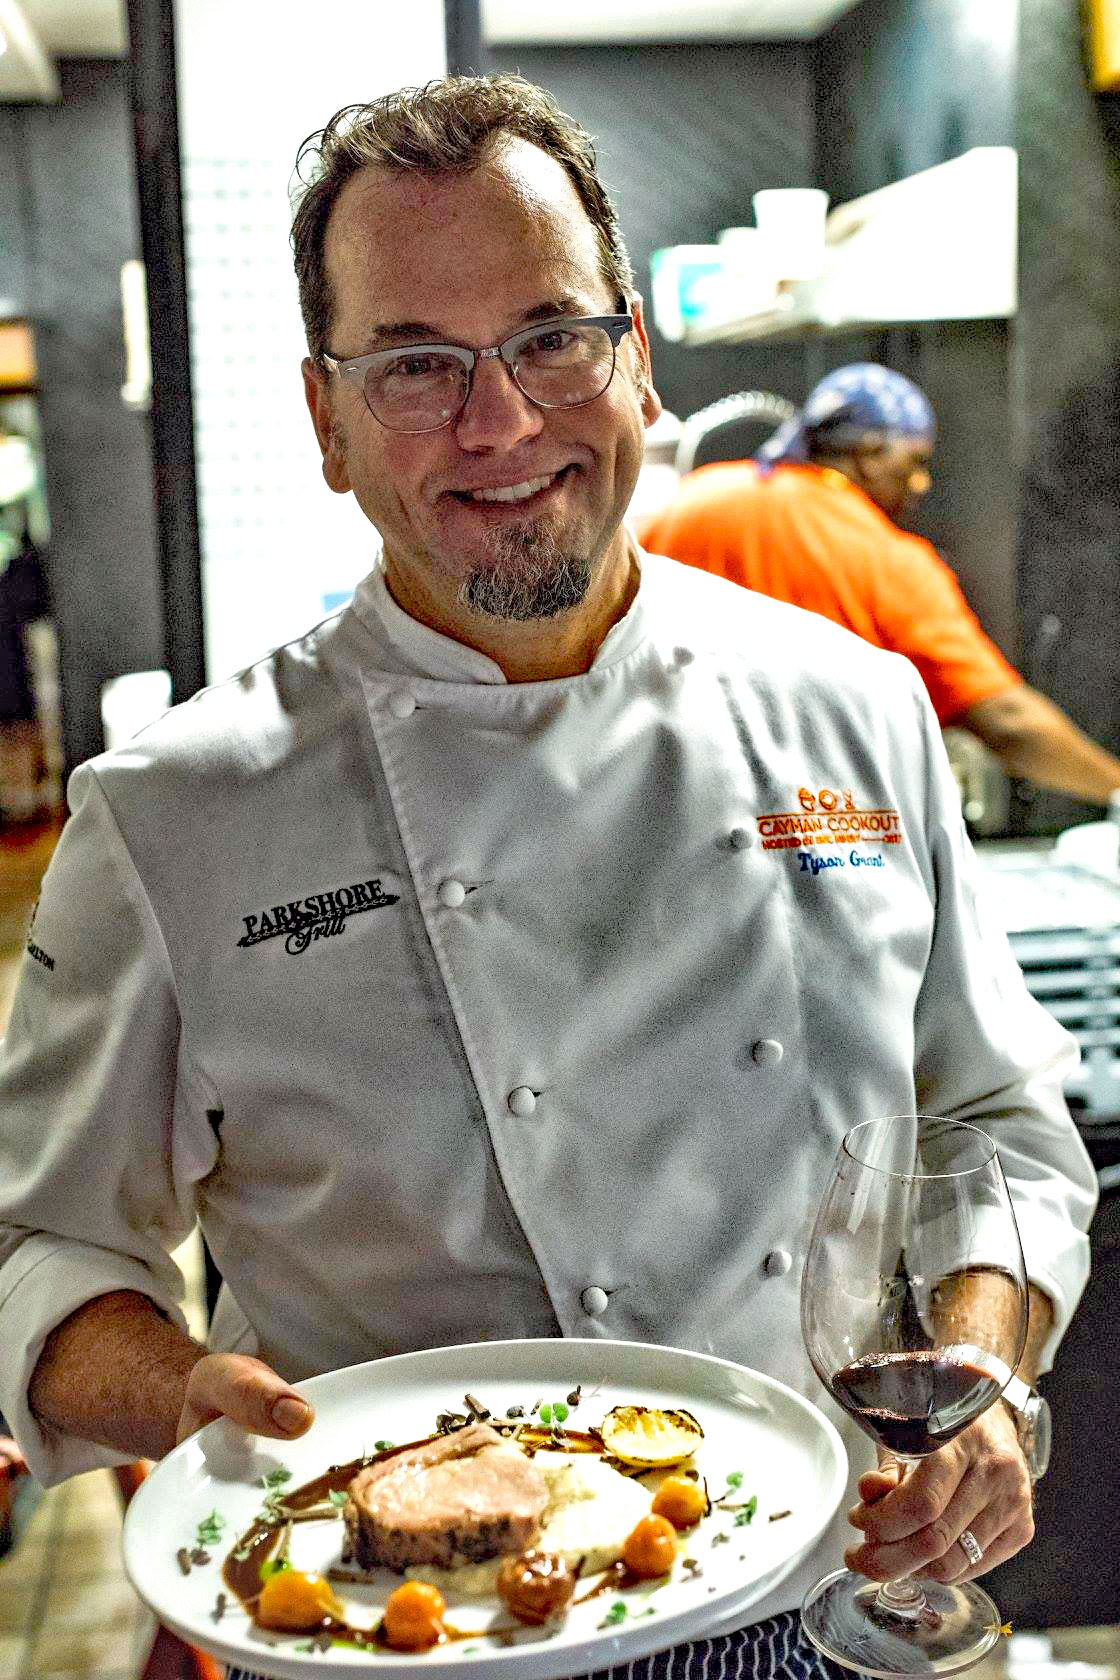 Tyson Grant - Executive Chef / Partner at Parkshore Grill